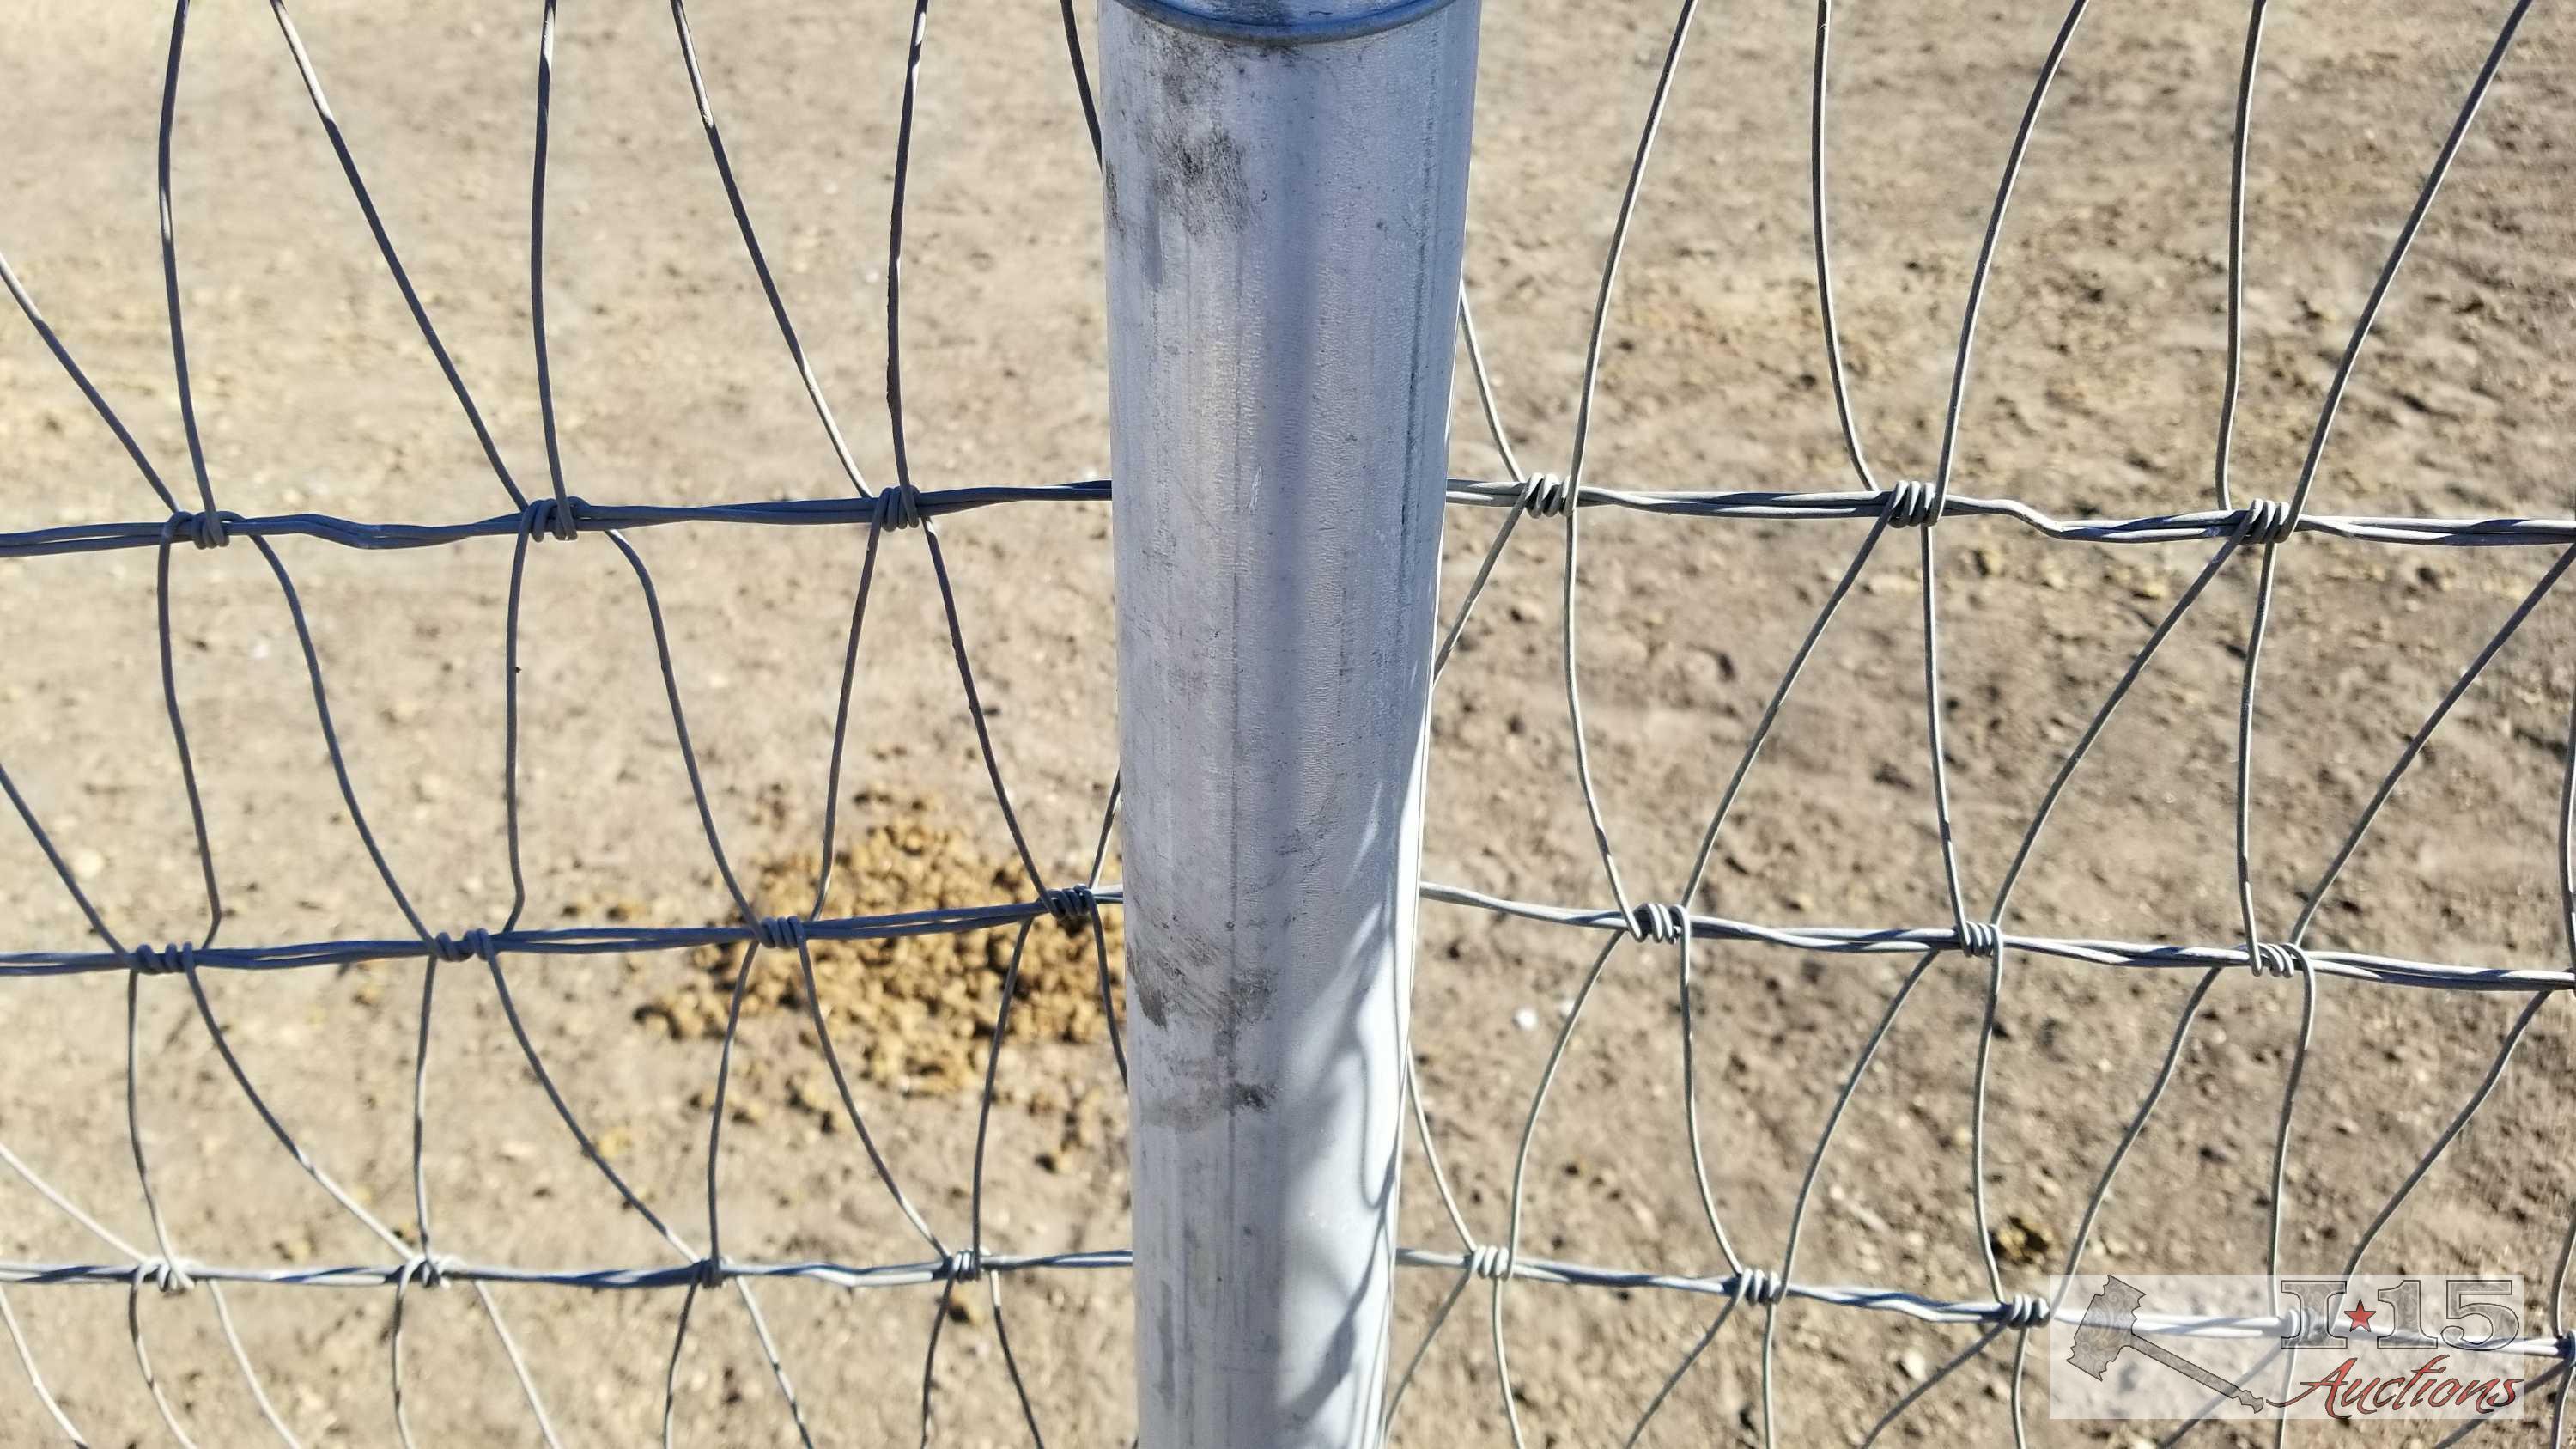 Approx. 3,850' of 5' Tall Fencing with Partial Double Post